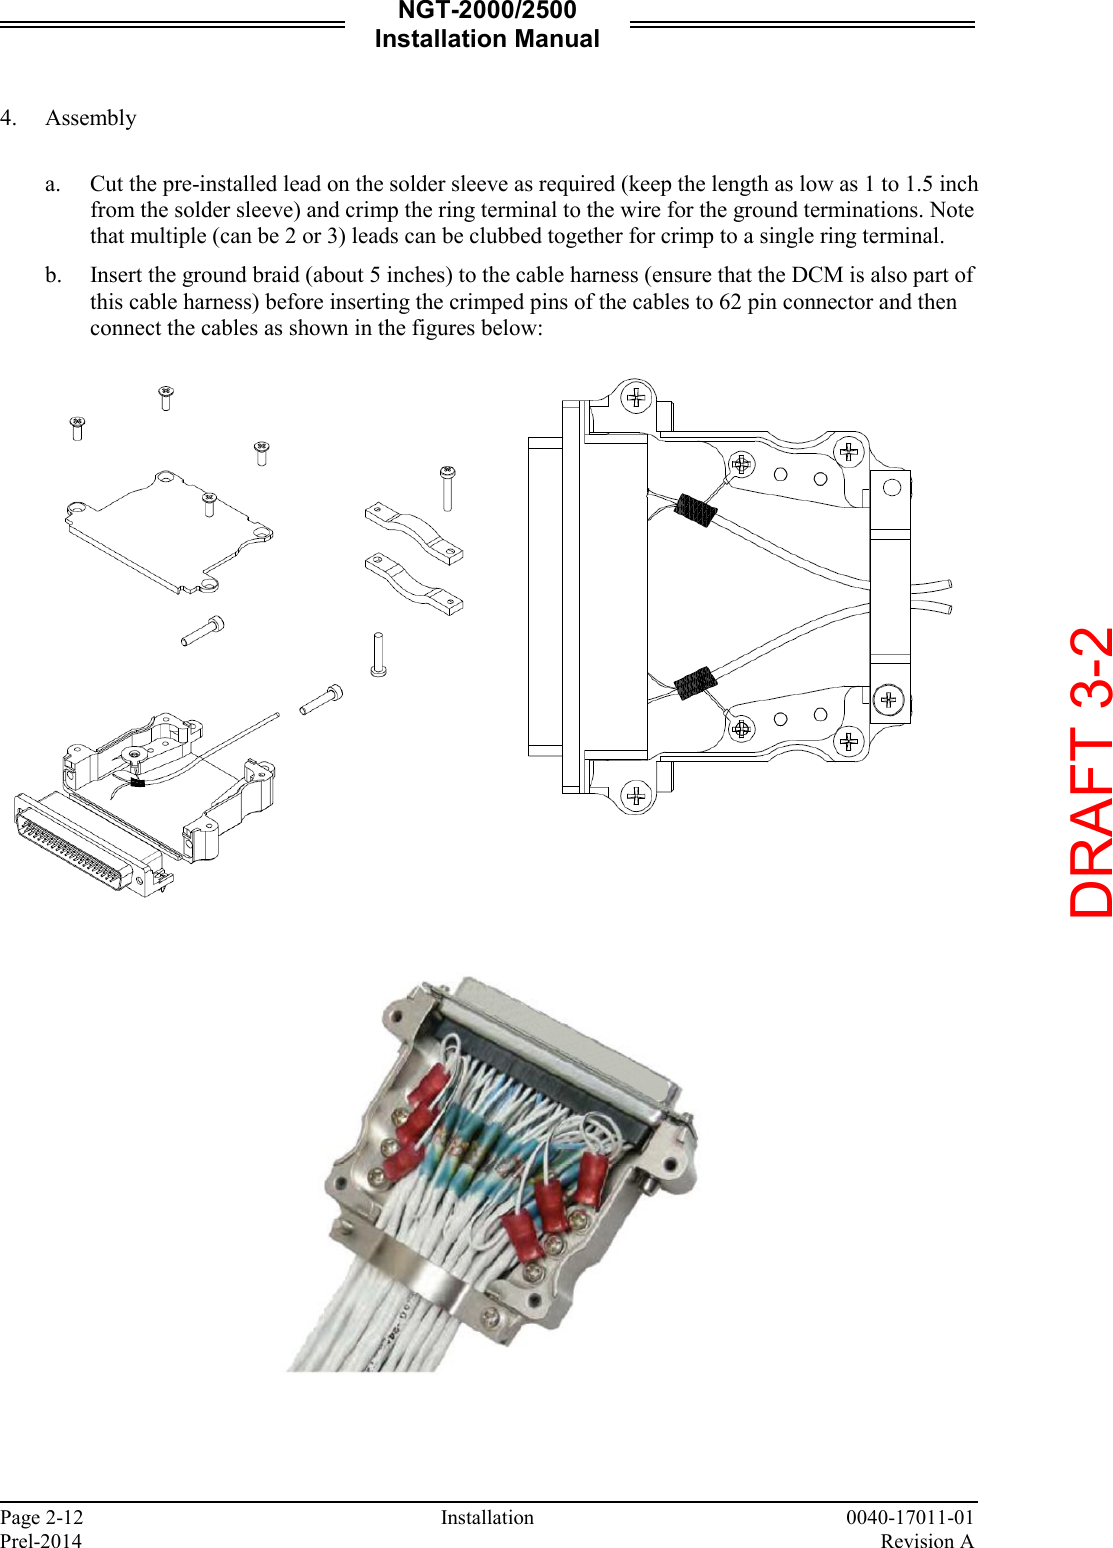 NGT-2000/2500 Installation Manual  Page 2-12     Installation 0040-17011-01 Prel-2014    Revision A  4. Assembly  a. Cut the pre-installed lead on the solder sleeve as required (keep the length as low as 1 to 1.5 inch from the solder sleeve) and crimp the ring terminal to the wire for the ground terminations. Note that multiple (can be 2 or 3) leads can be clubbed together for crimp to a single ring terminal. b. Insert the ground braid (about 5 inches) to the cable harness (ensure that the DCM is also part of this cable harness) before inserting the crimped pins of the cables to 62 pin connector and then connect the cables as shown in the figures below:         DRAFT 3-2